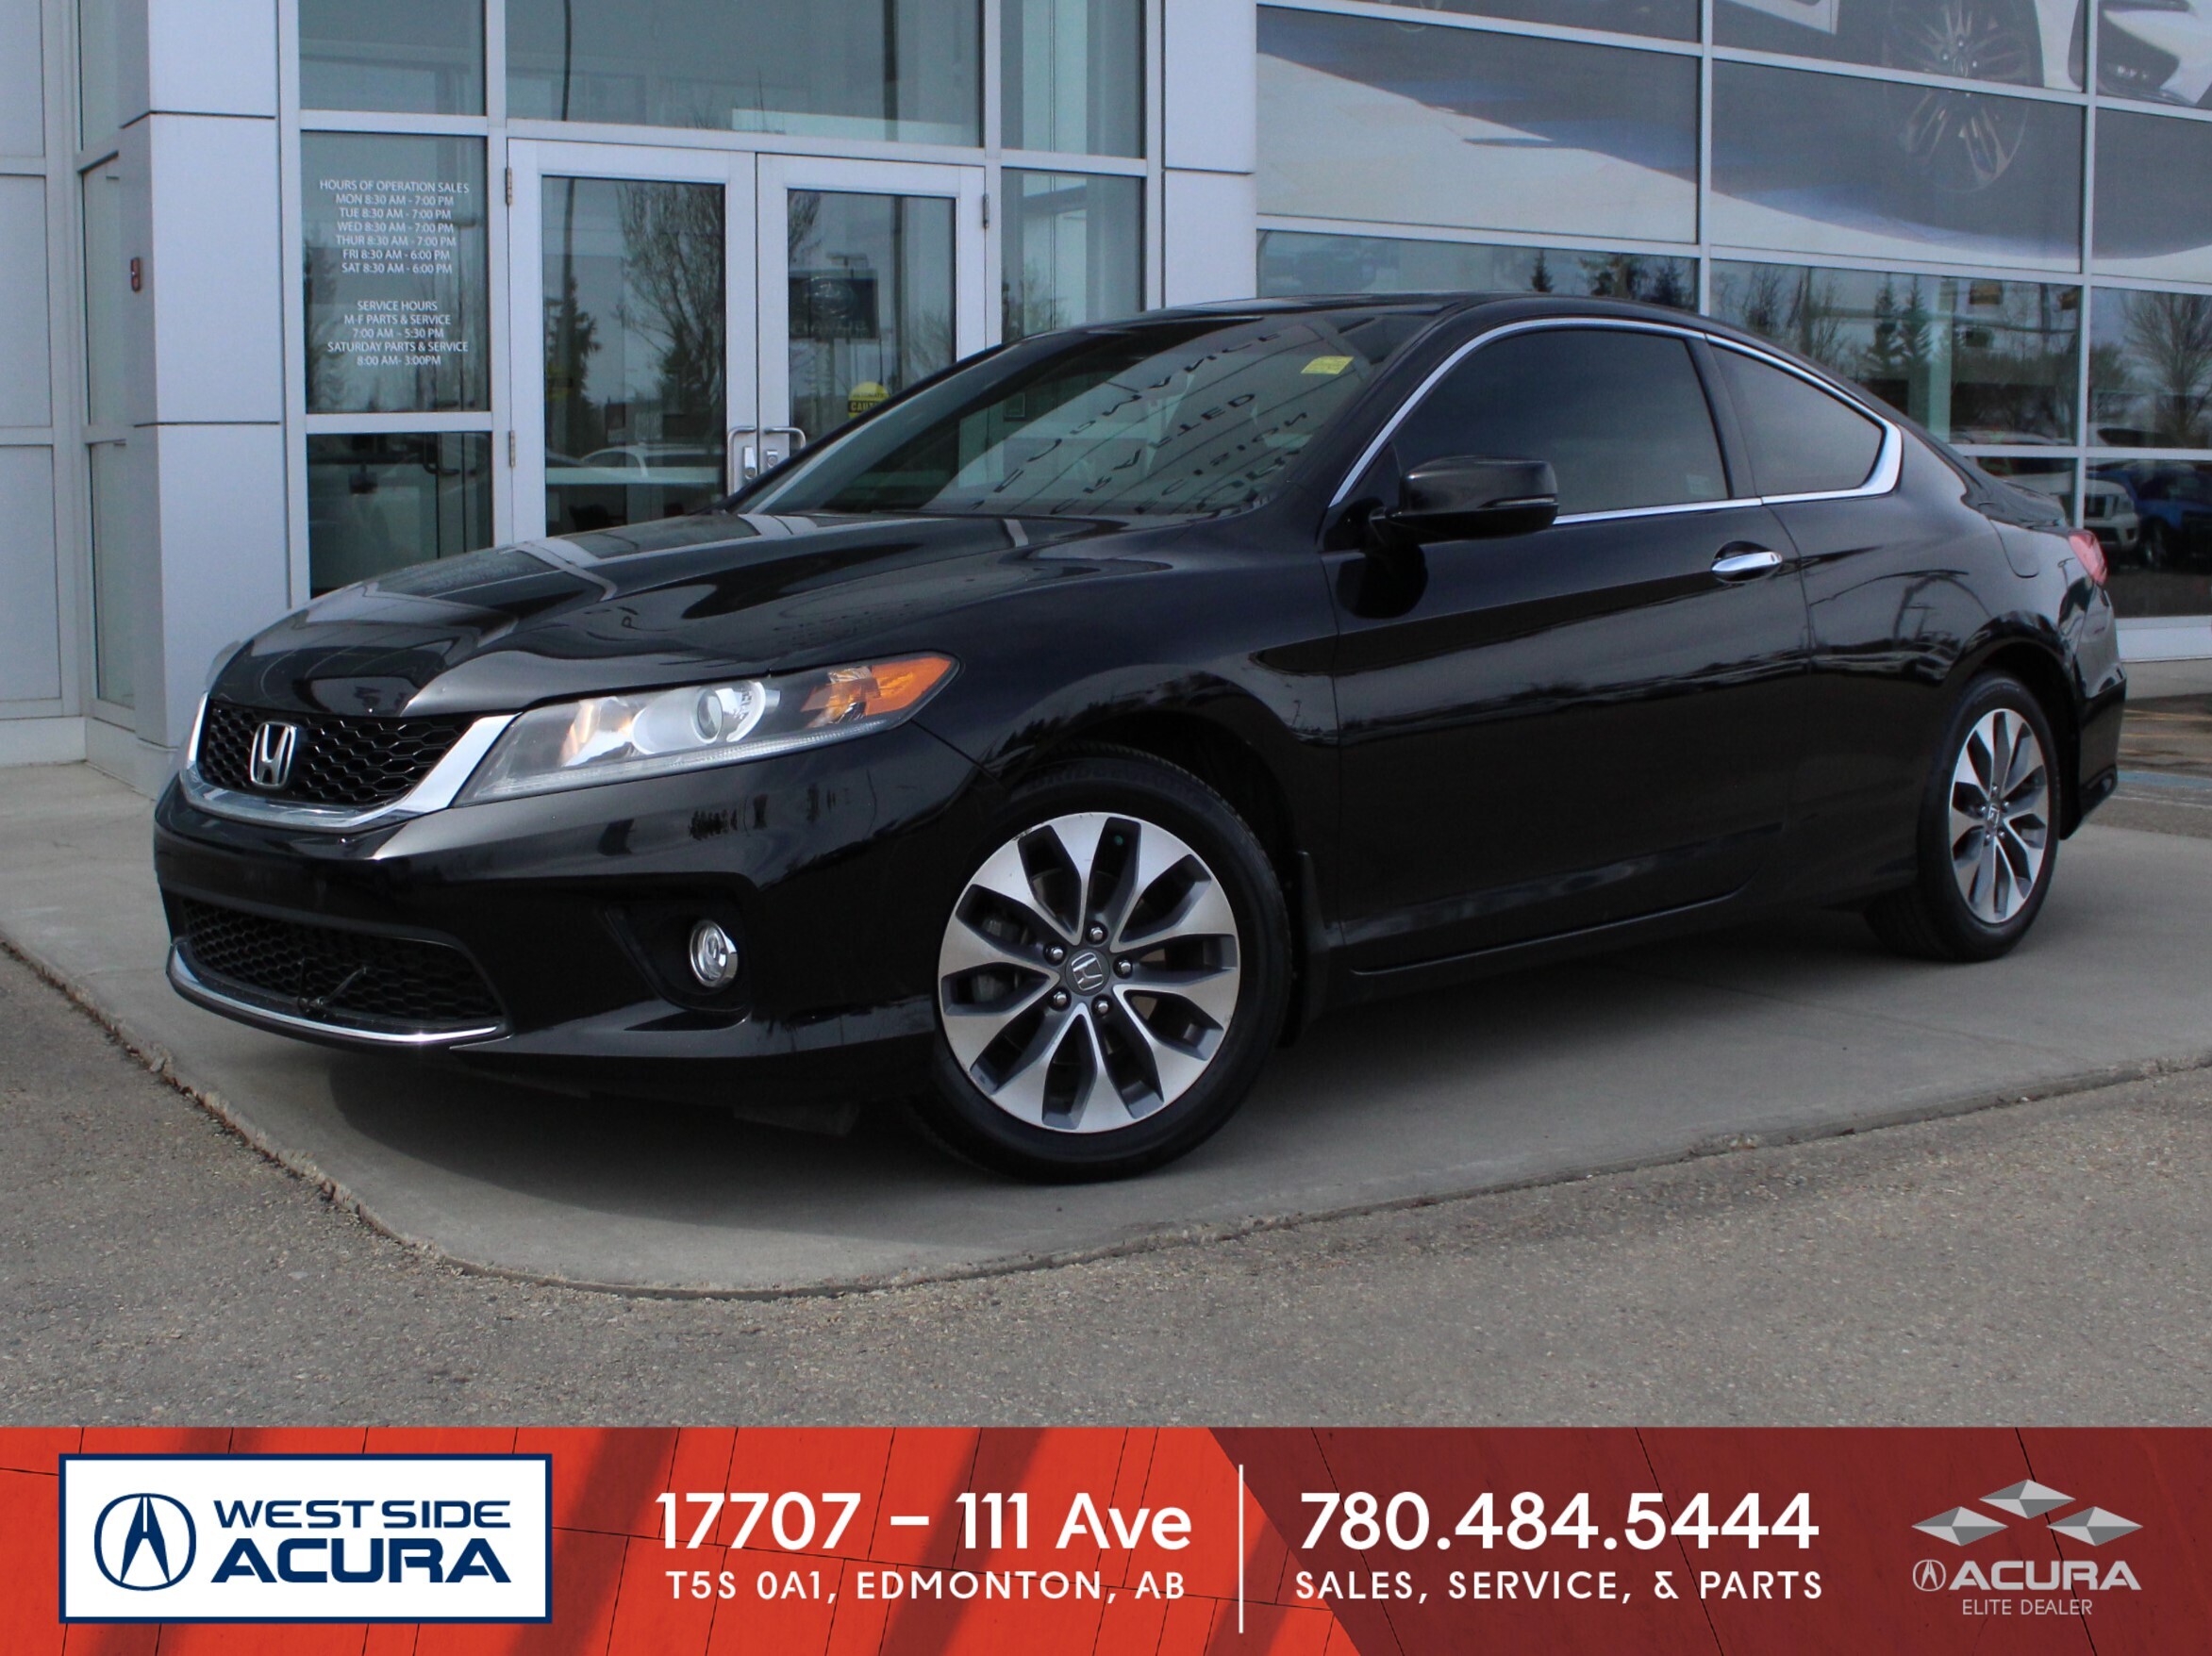 2013 Honda Accord Coupe EX | 2 SETS OF TIRES